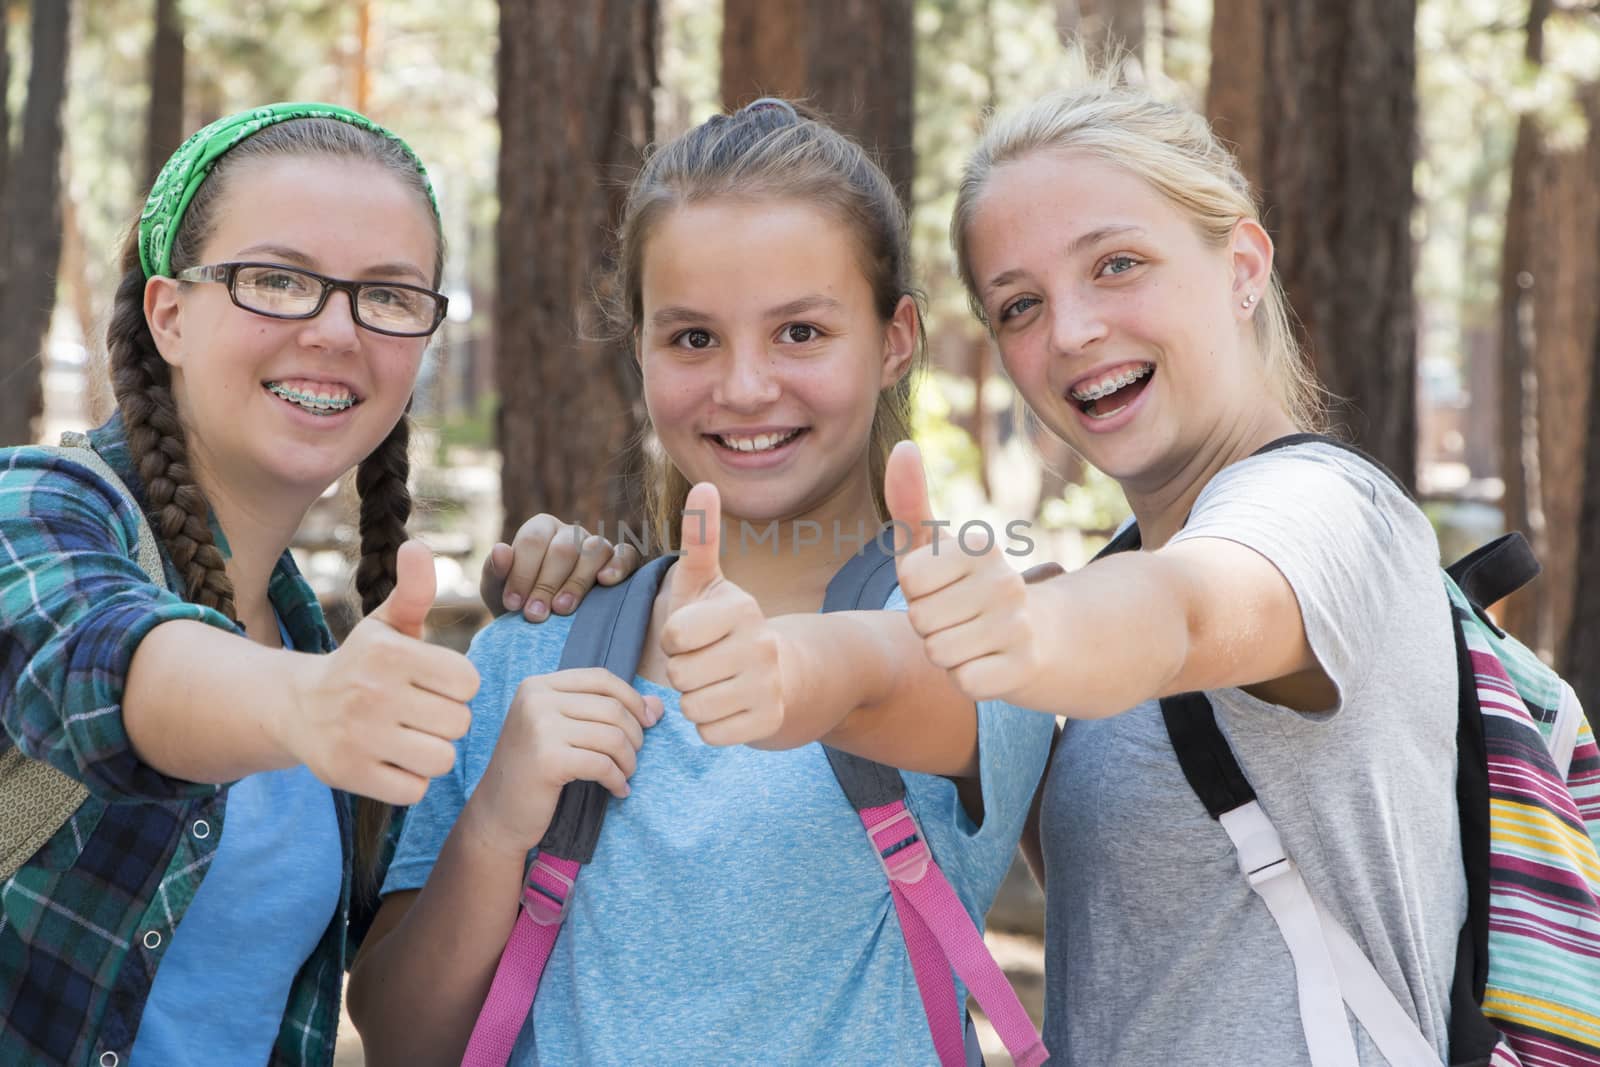 Young Girls with Thumbs up and down